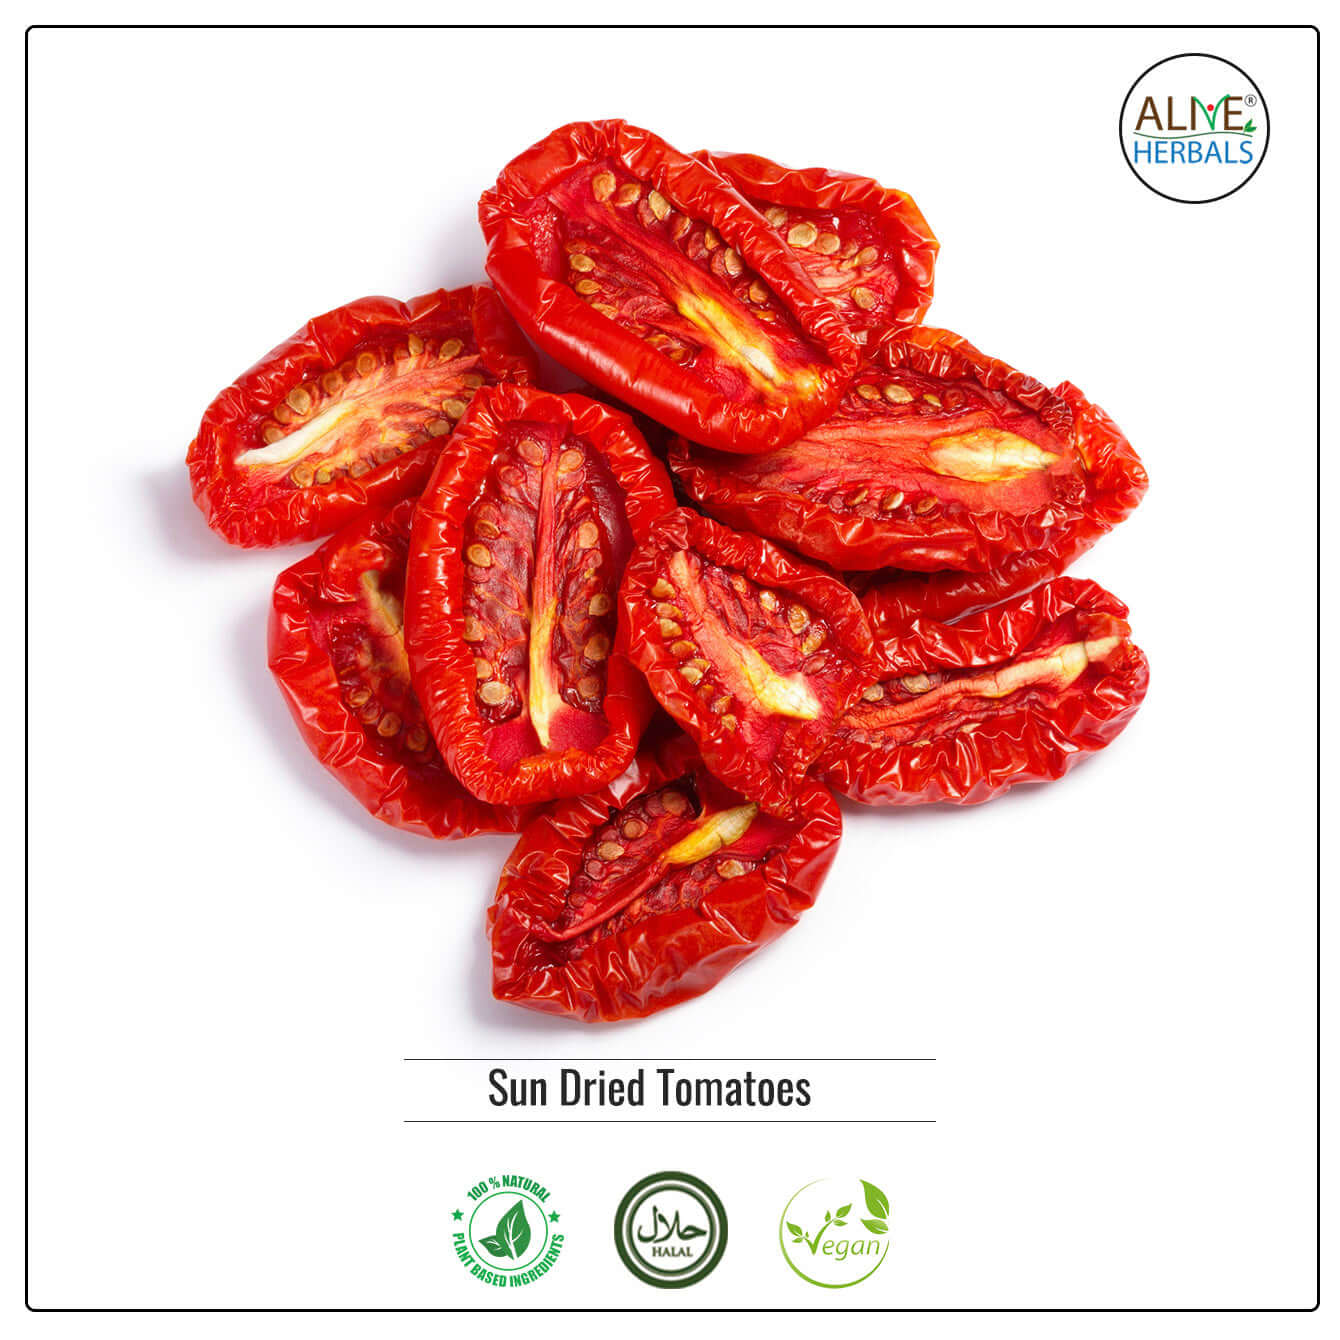 Sun dried tomatoes - Buy at Natural Food Store | Alive Herbals.